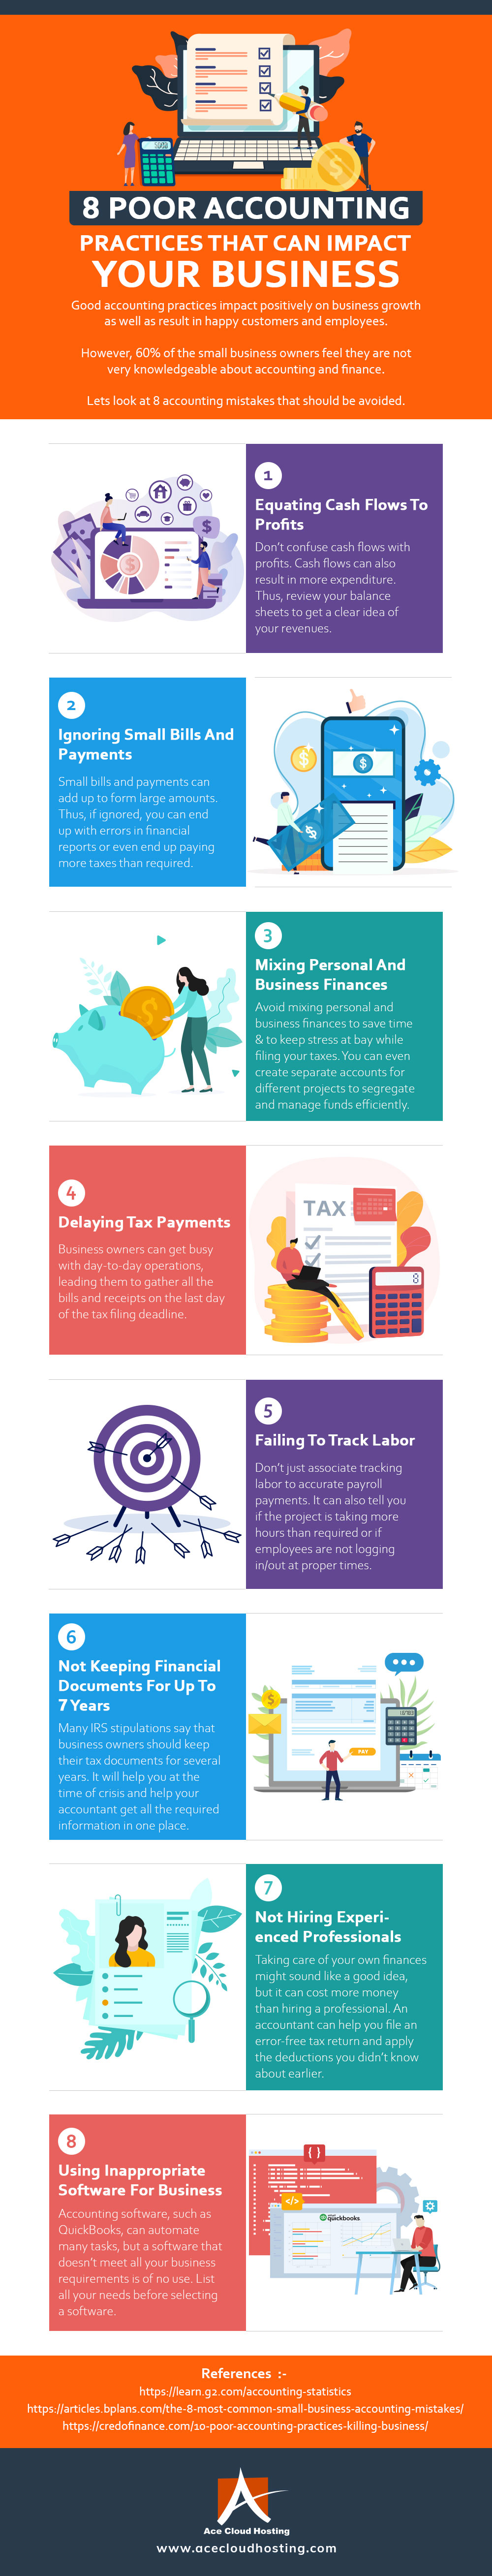 8 Poor Accounting Practices That Can Impact Your Businesses [Infographic]